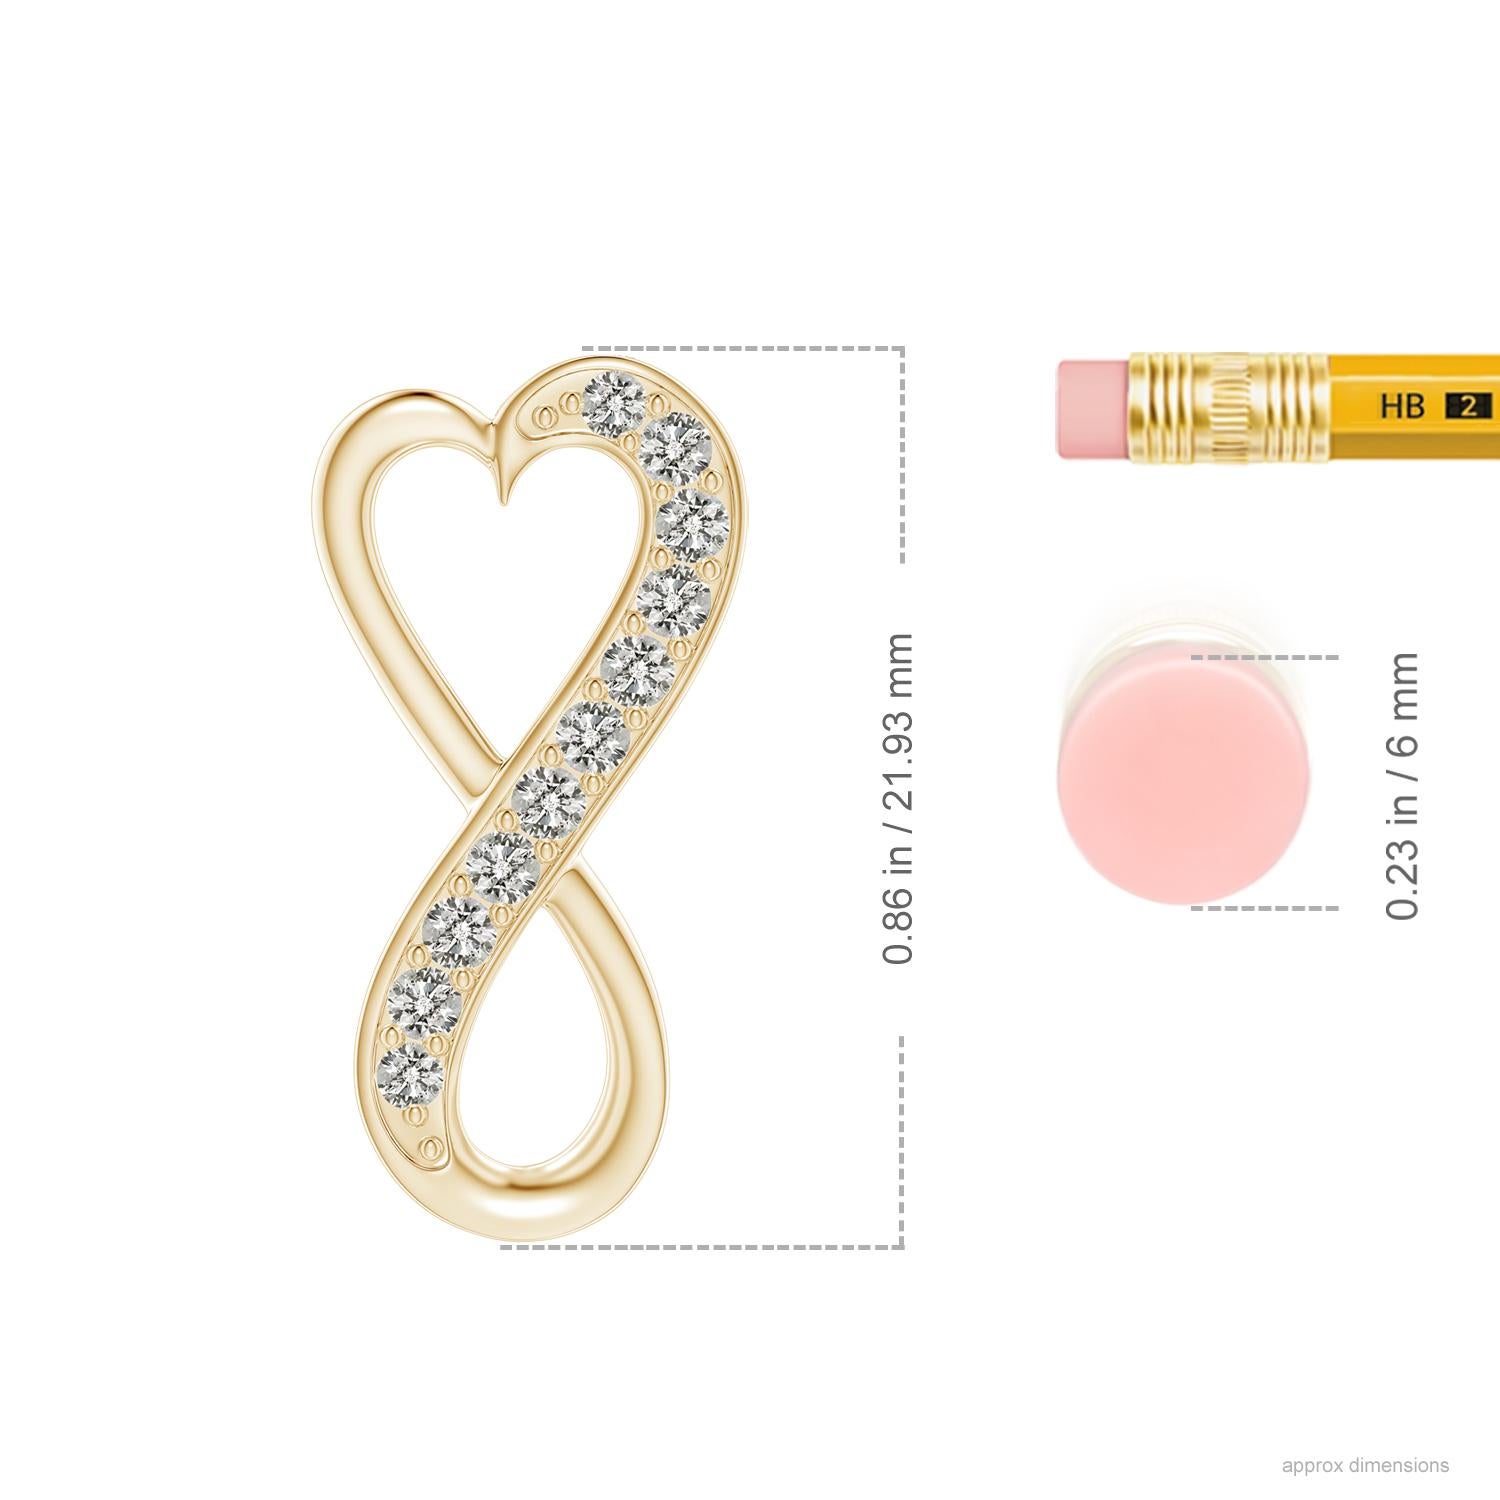 Designed with a hidden bale, this contemporary pendant features a heart frame that extends to form a stunning infinity. Shimmering diamonds partially accentuate the curves of this infinity heart pendant. It is skillfully crafted in 14k yellow